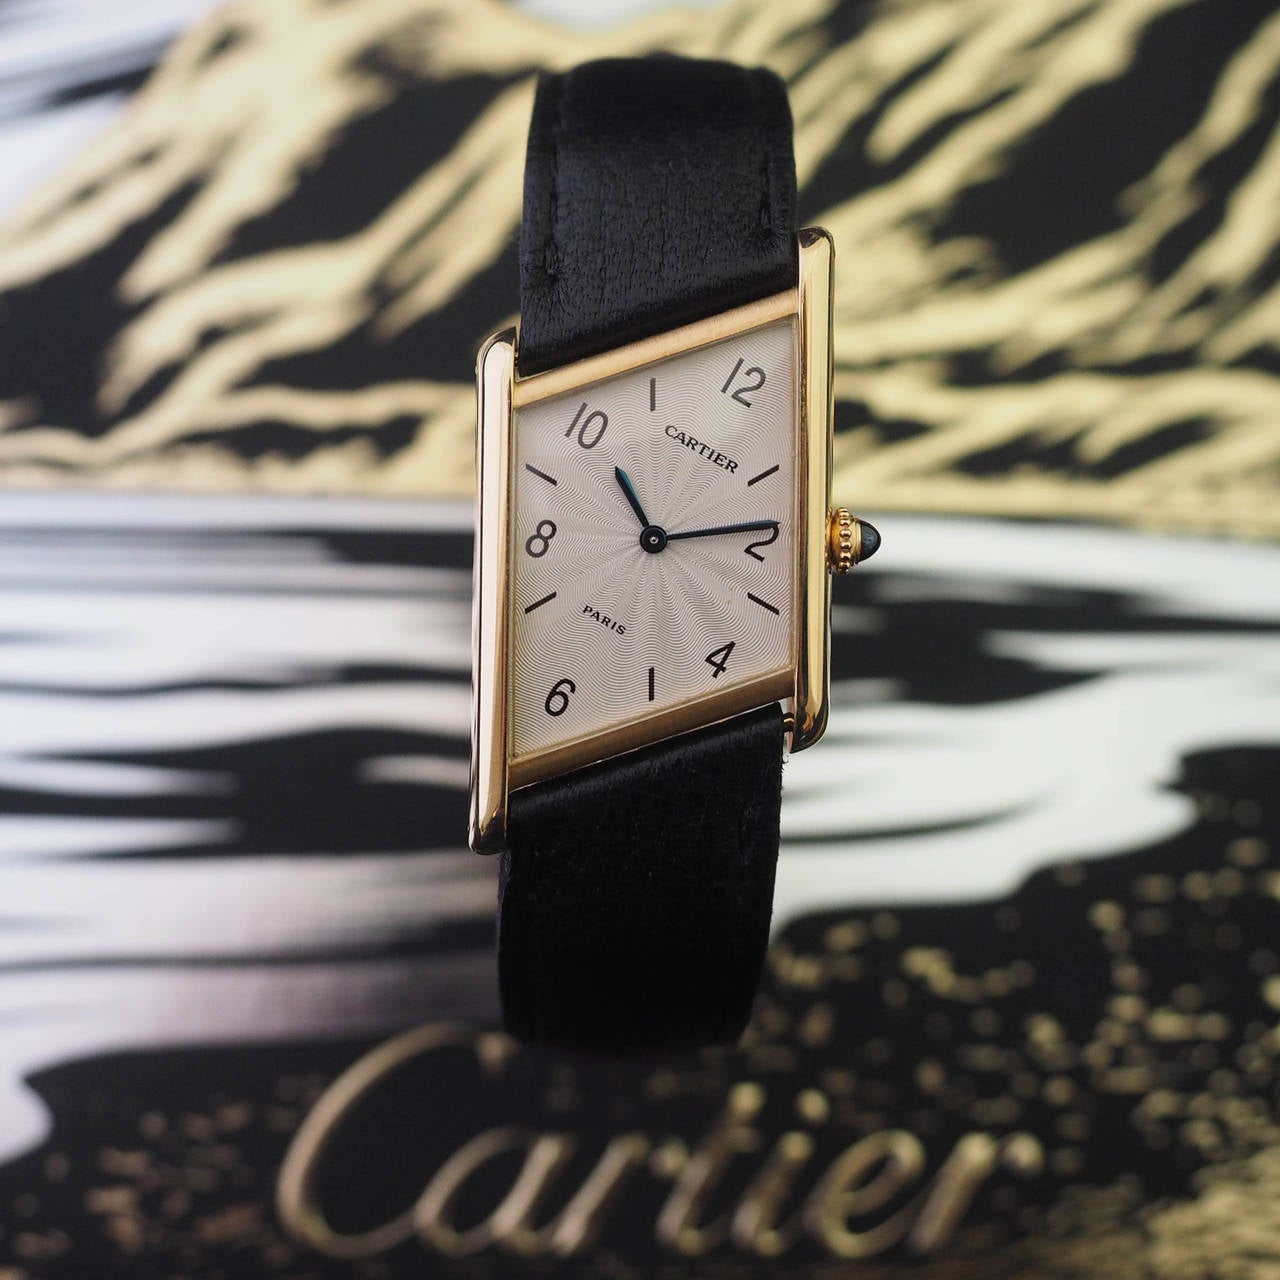 Cartier
Cartier Tank Asymetrique
Limited Edition n° 248/300
18K Yellow Gold Case
Guilloche Dial with Arabic Numbers
18K Yellow Gold Original Cartier Deployante
Manual Winding
Dim.: 23 x 32 mm
Year: 1996